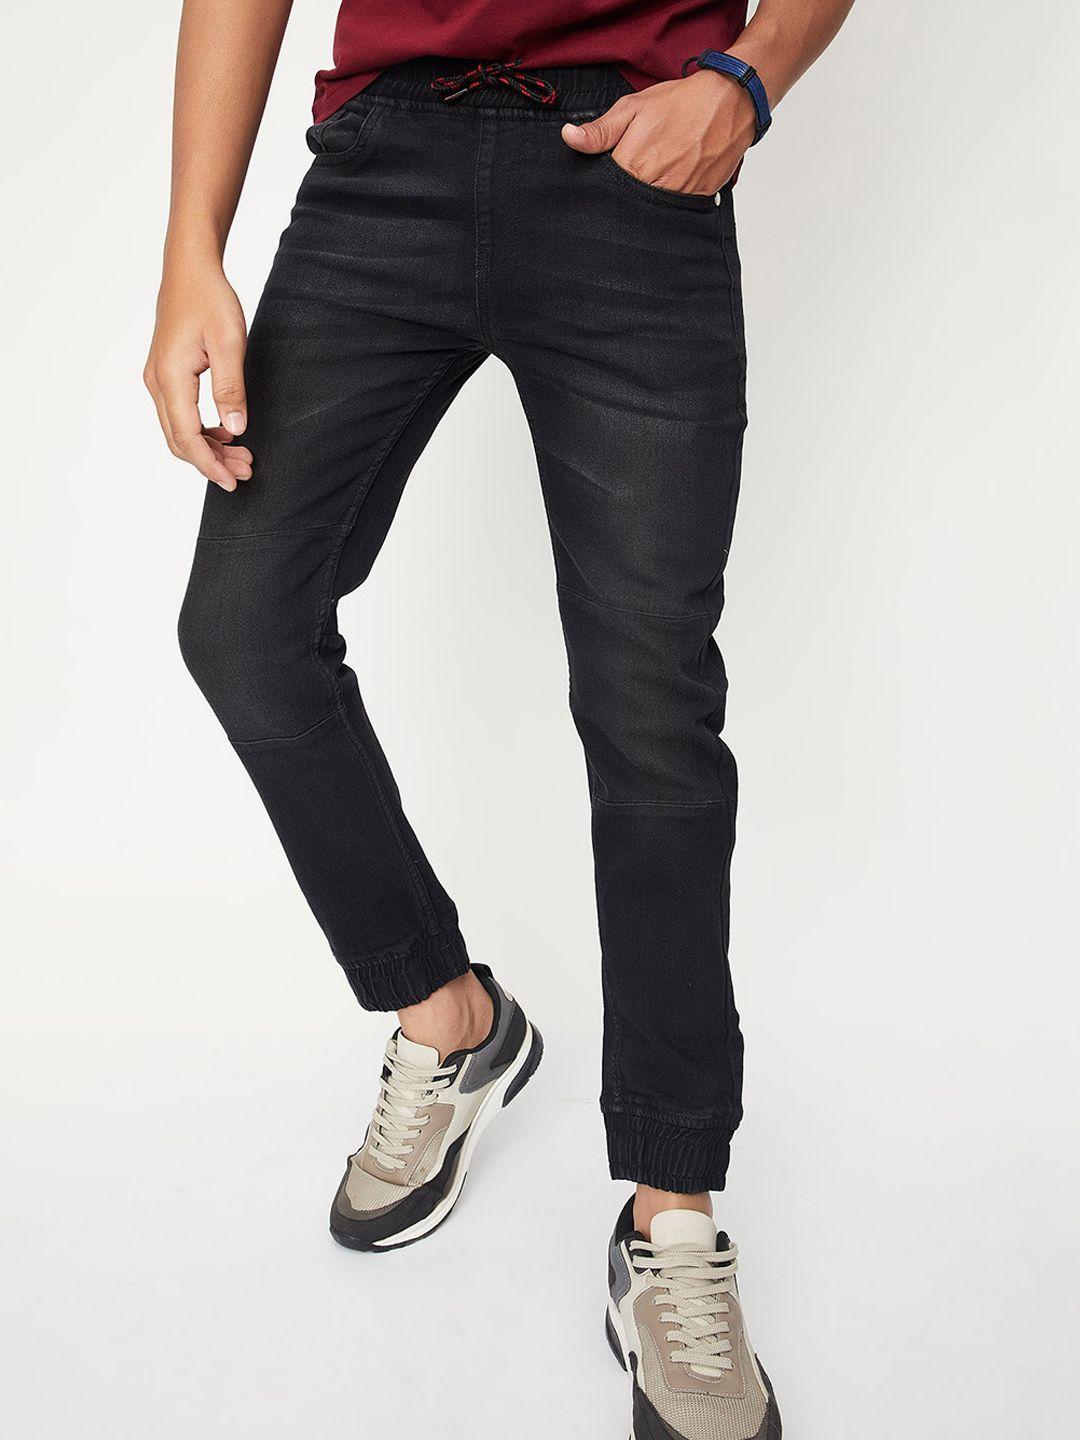 max-boys-regular-fit-mid-rise-jeans